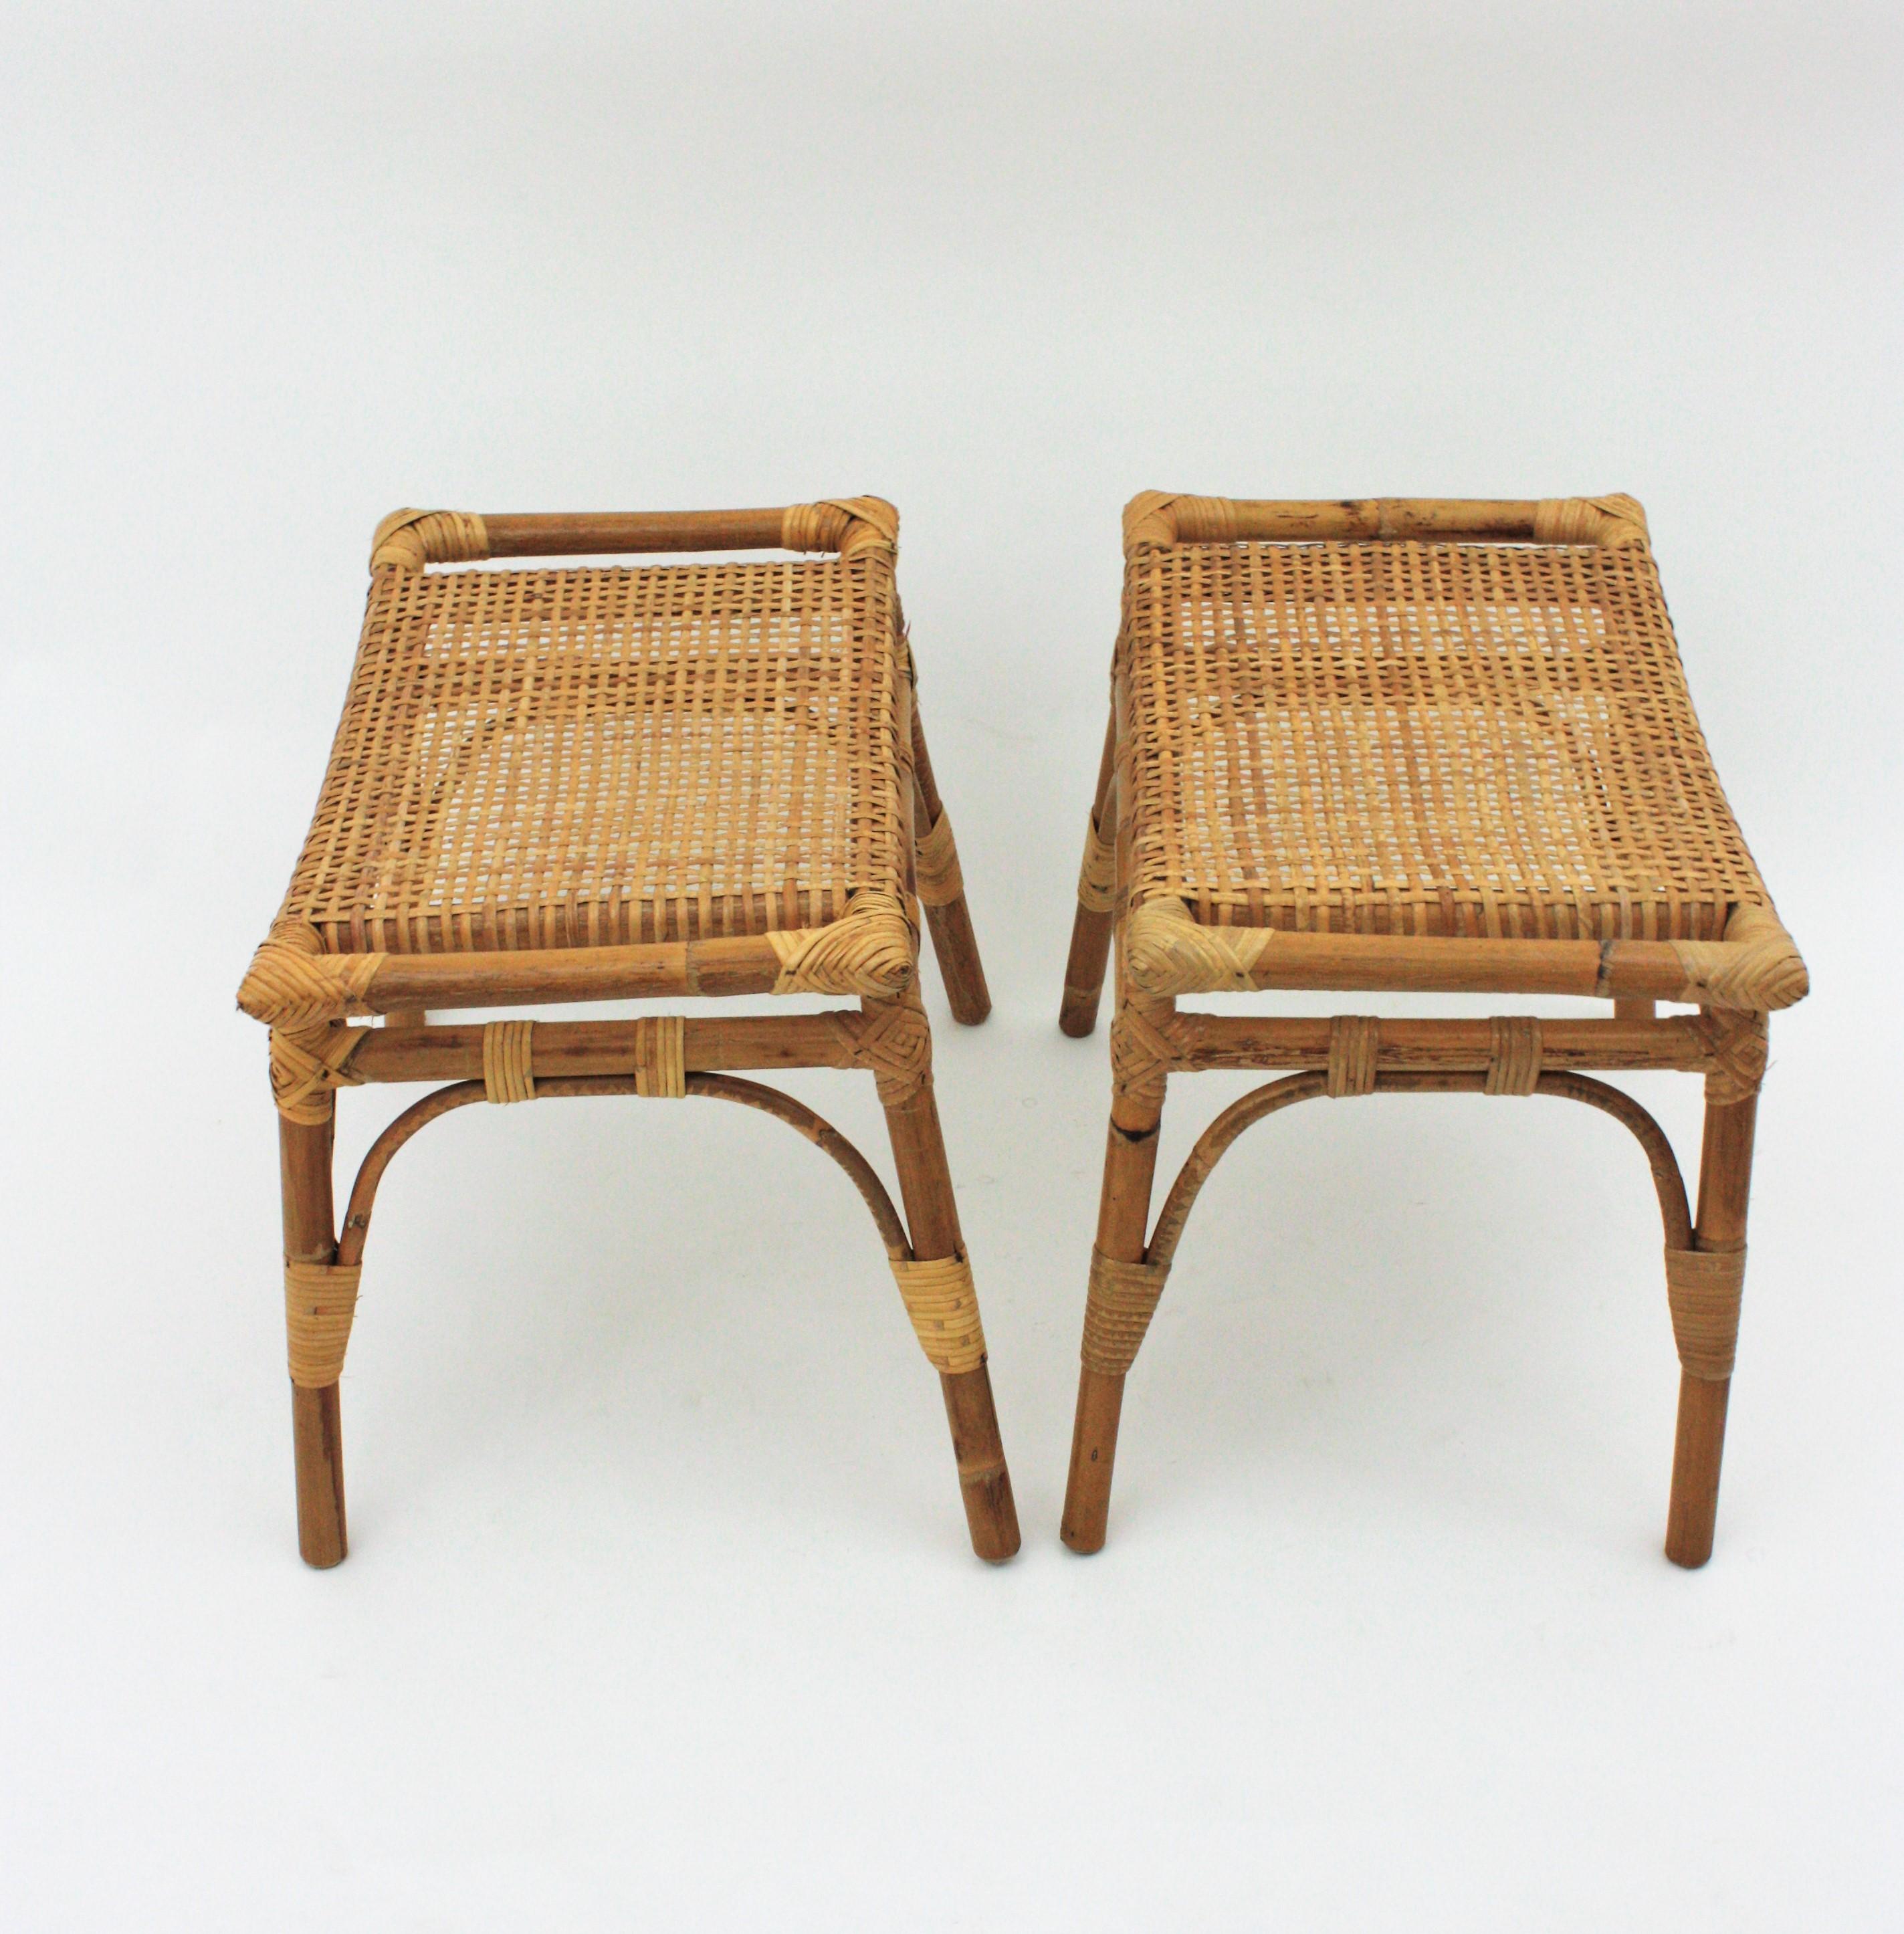 Pair of Bamboo Stools, Benches or Ottoman with Woven Wicker Cane Seats 3